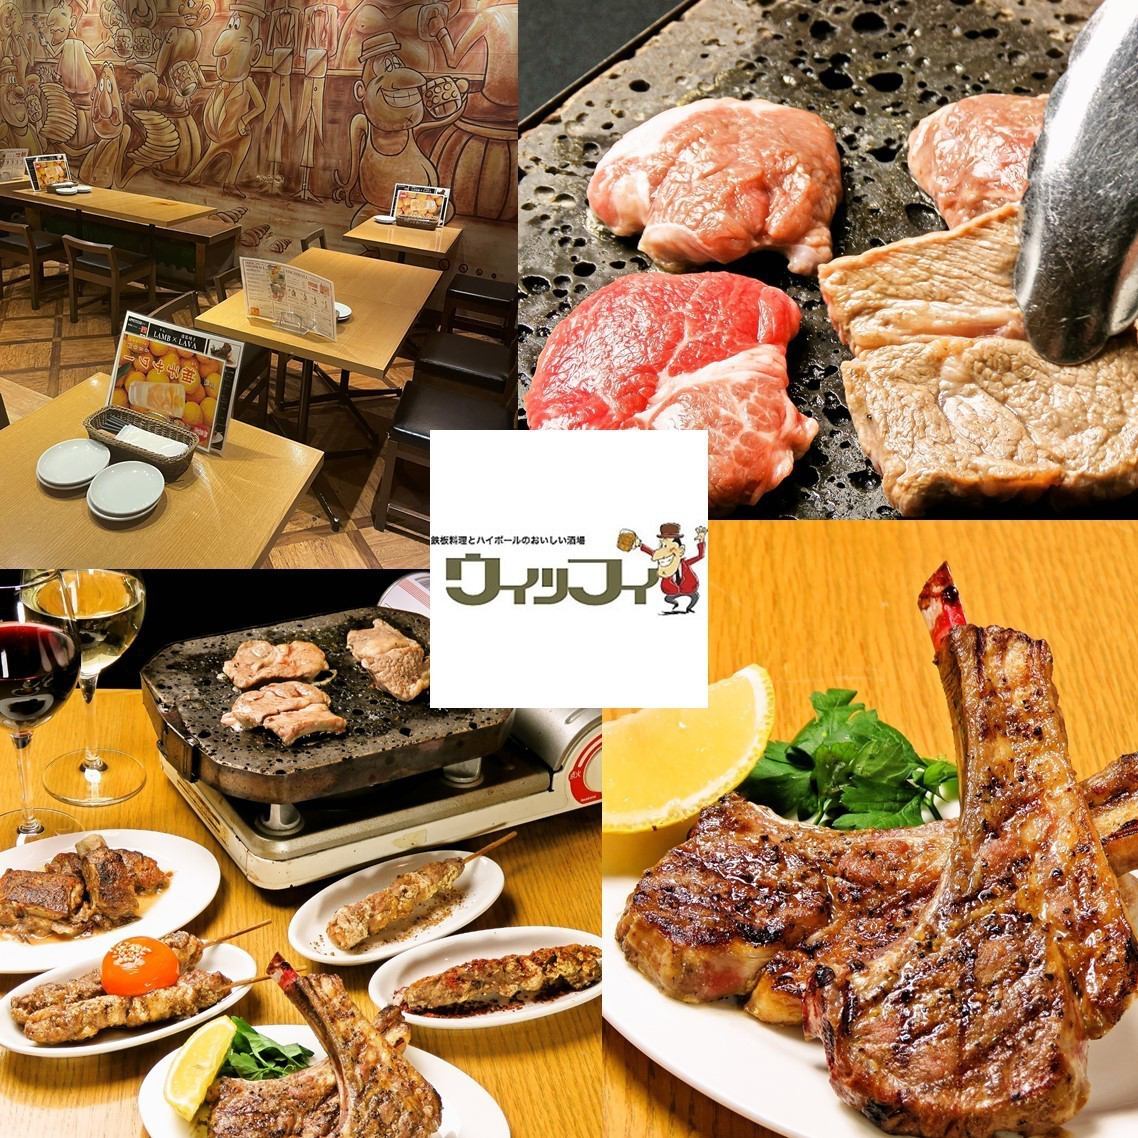 Enjoy lamb with a rich menu such as Genghis Khan grilled in lava